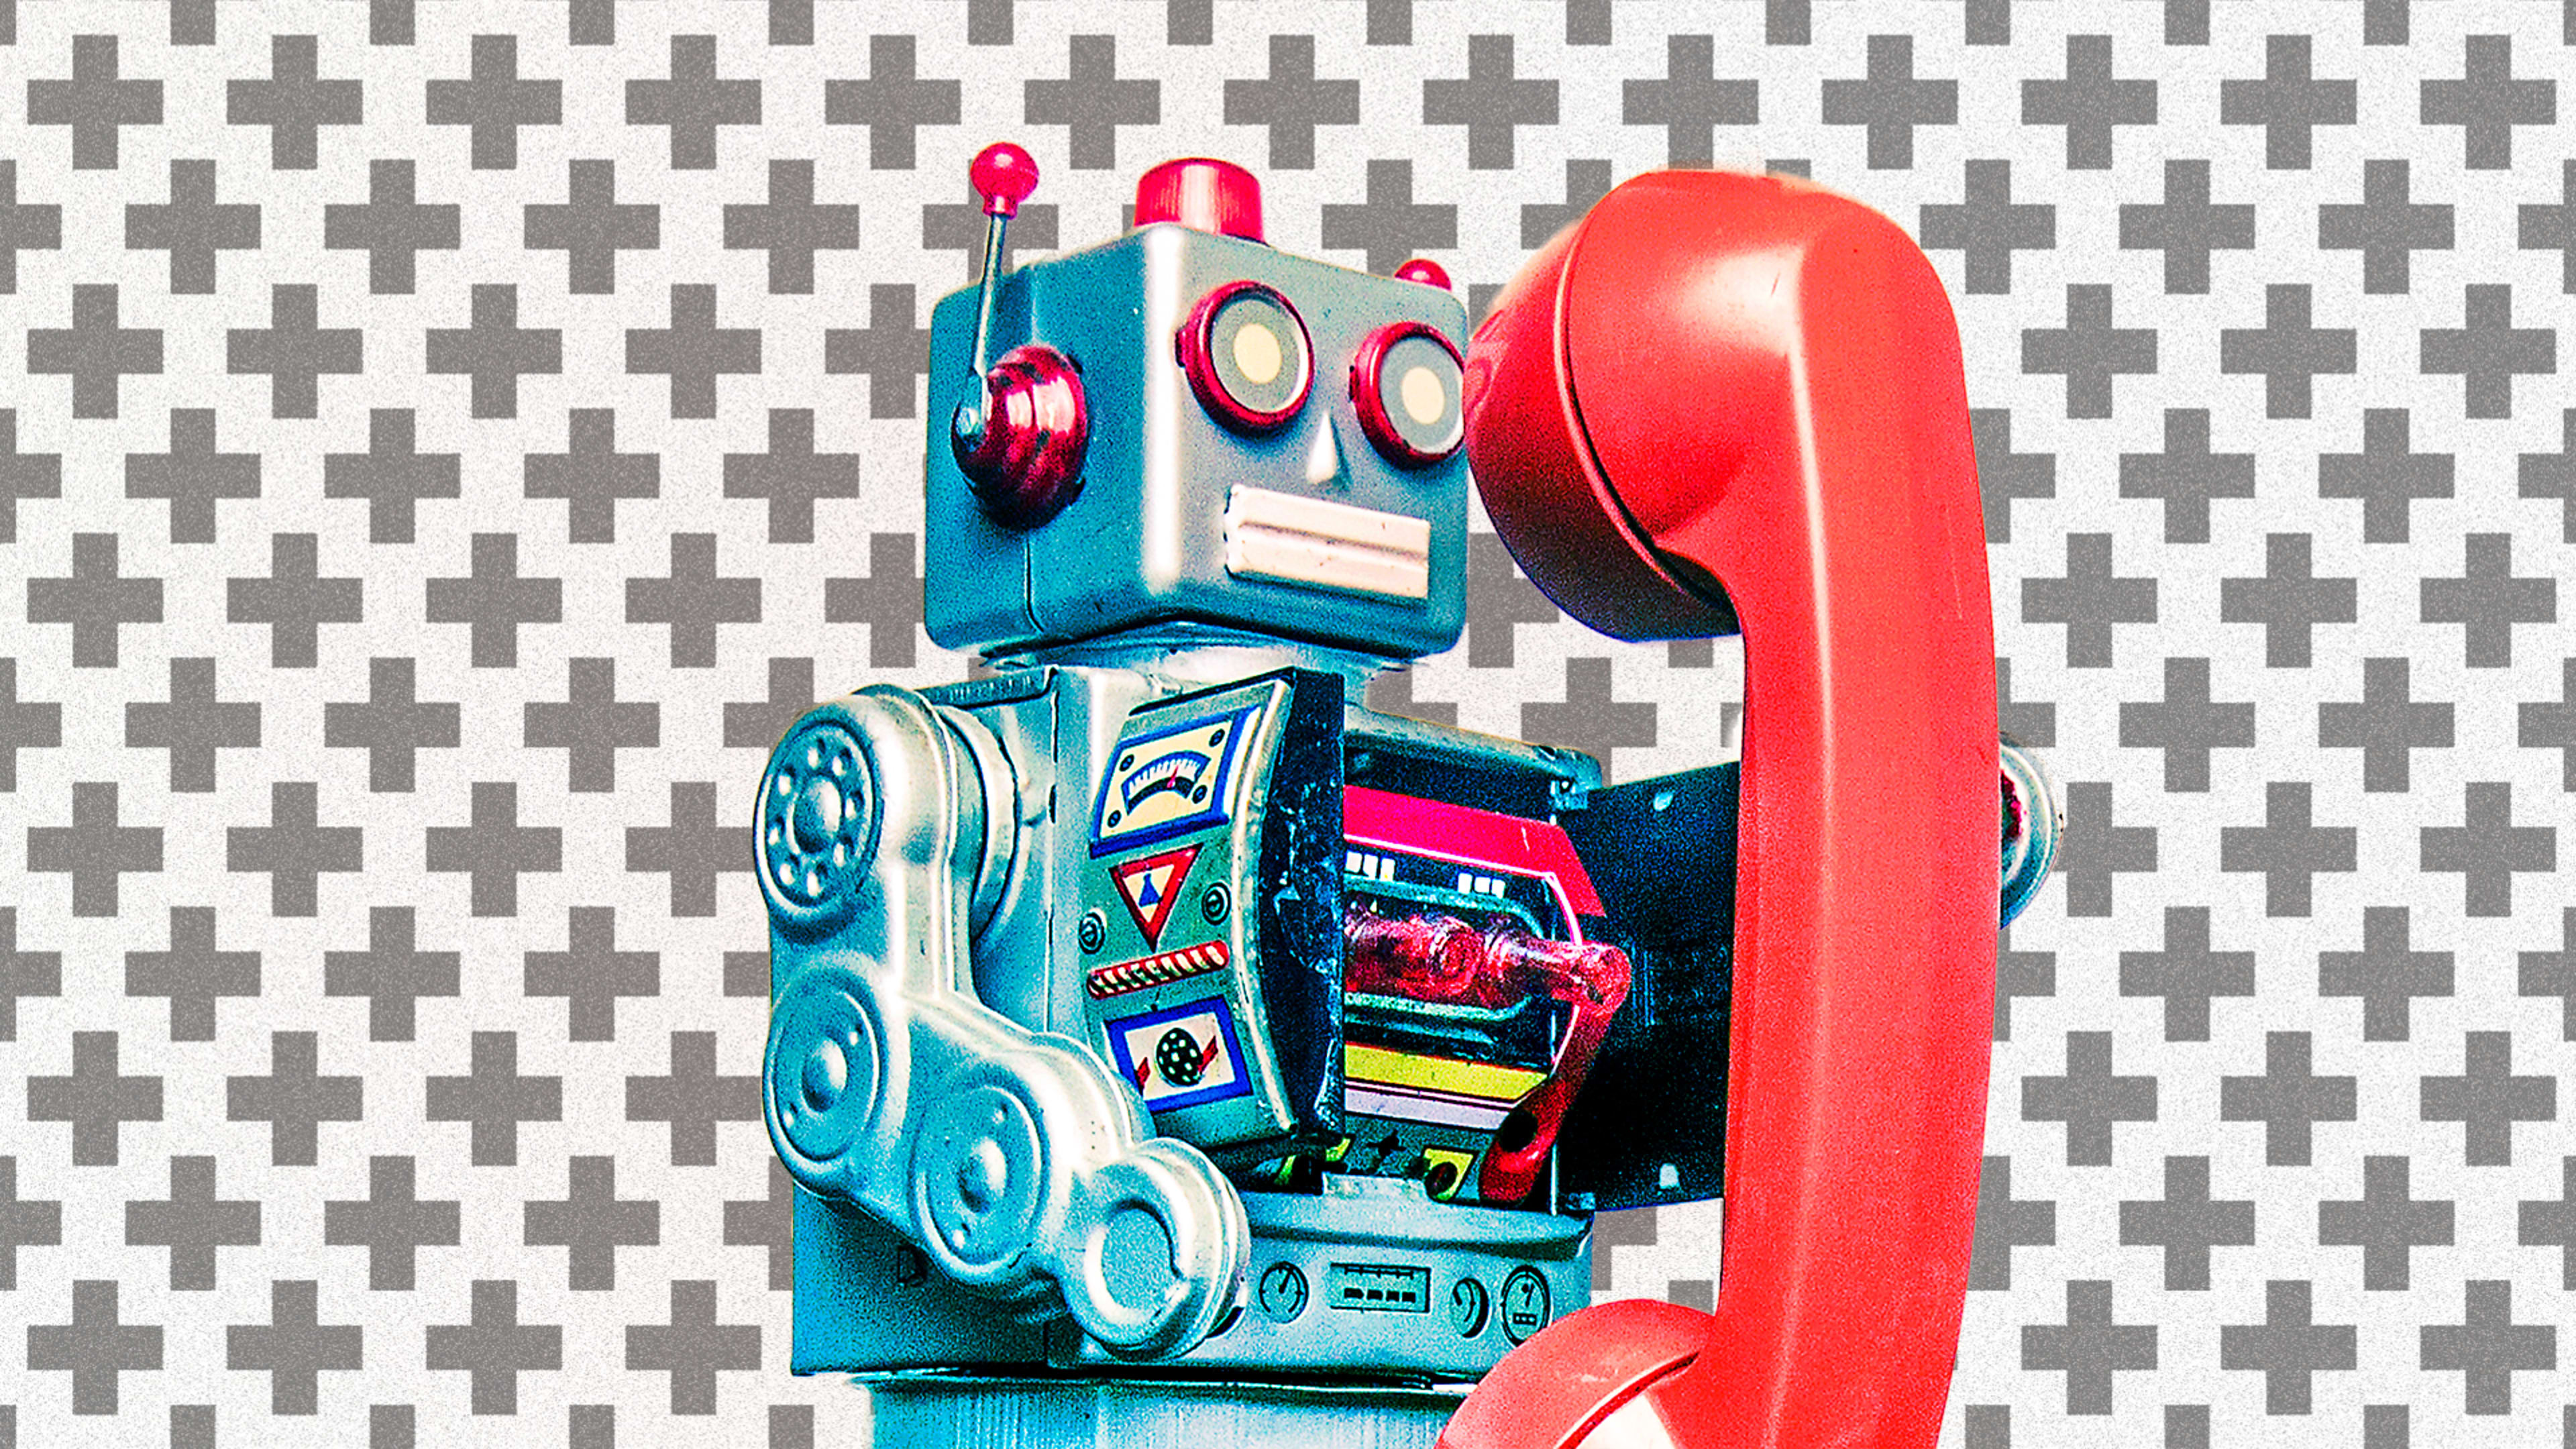 Study: Customers hate chatbots, except in this specific situation